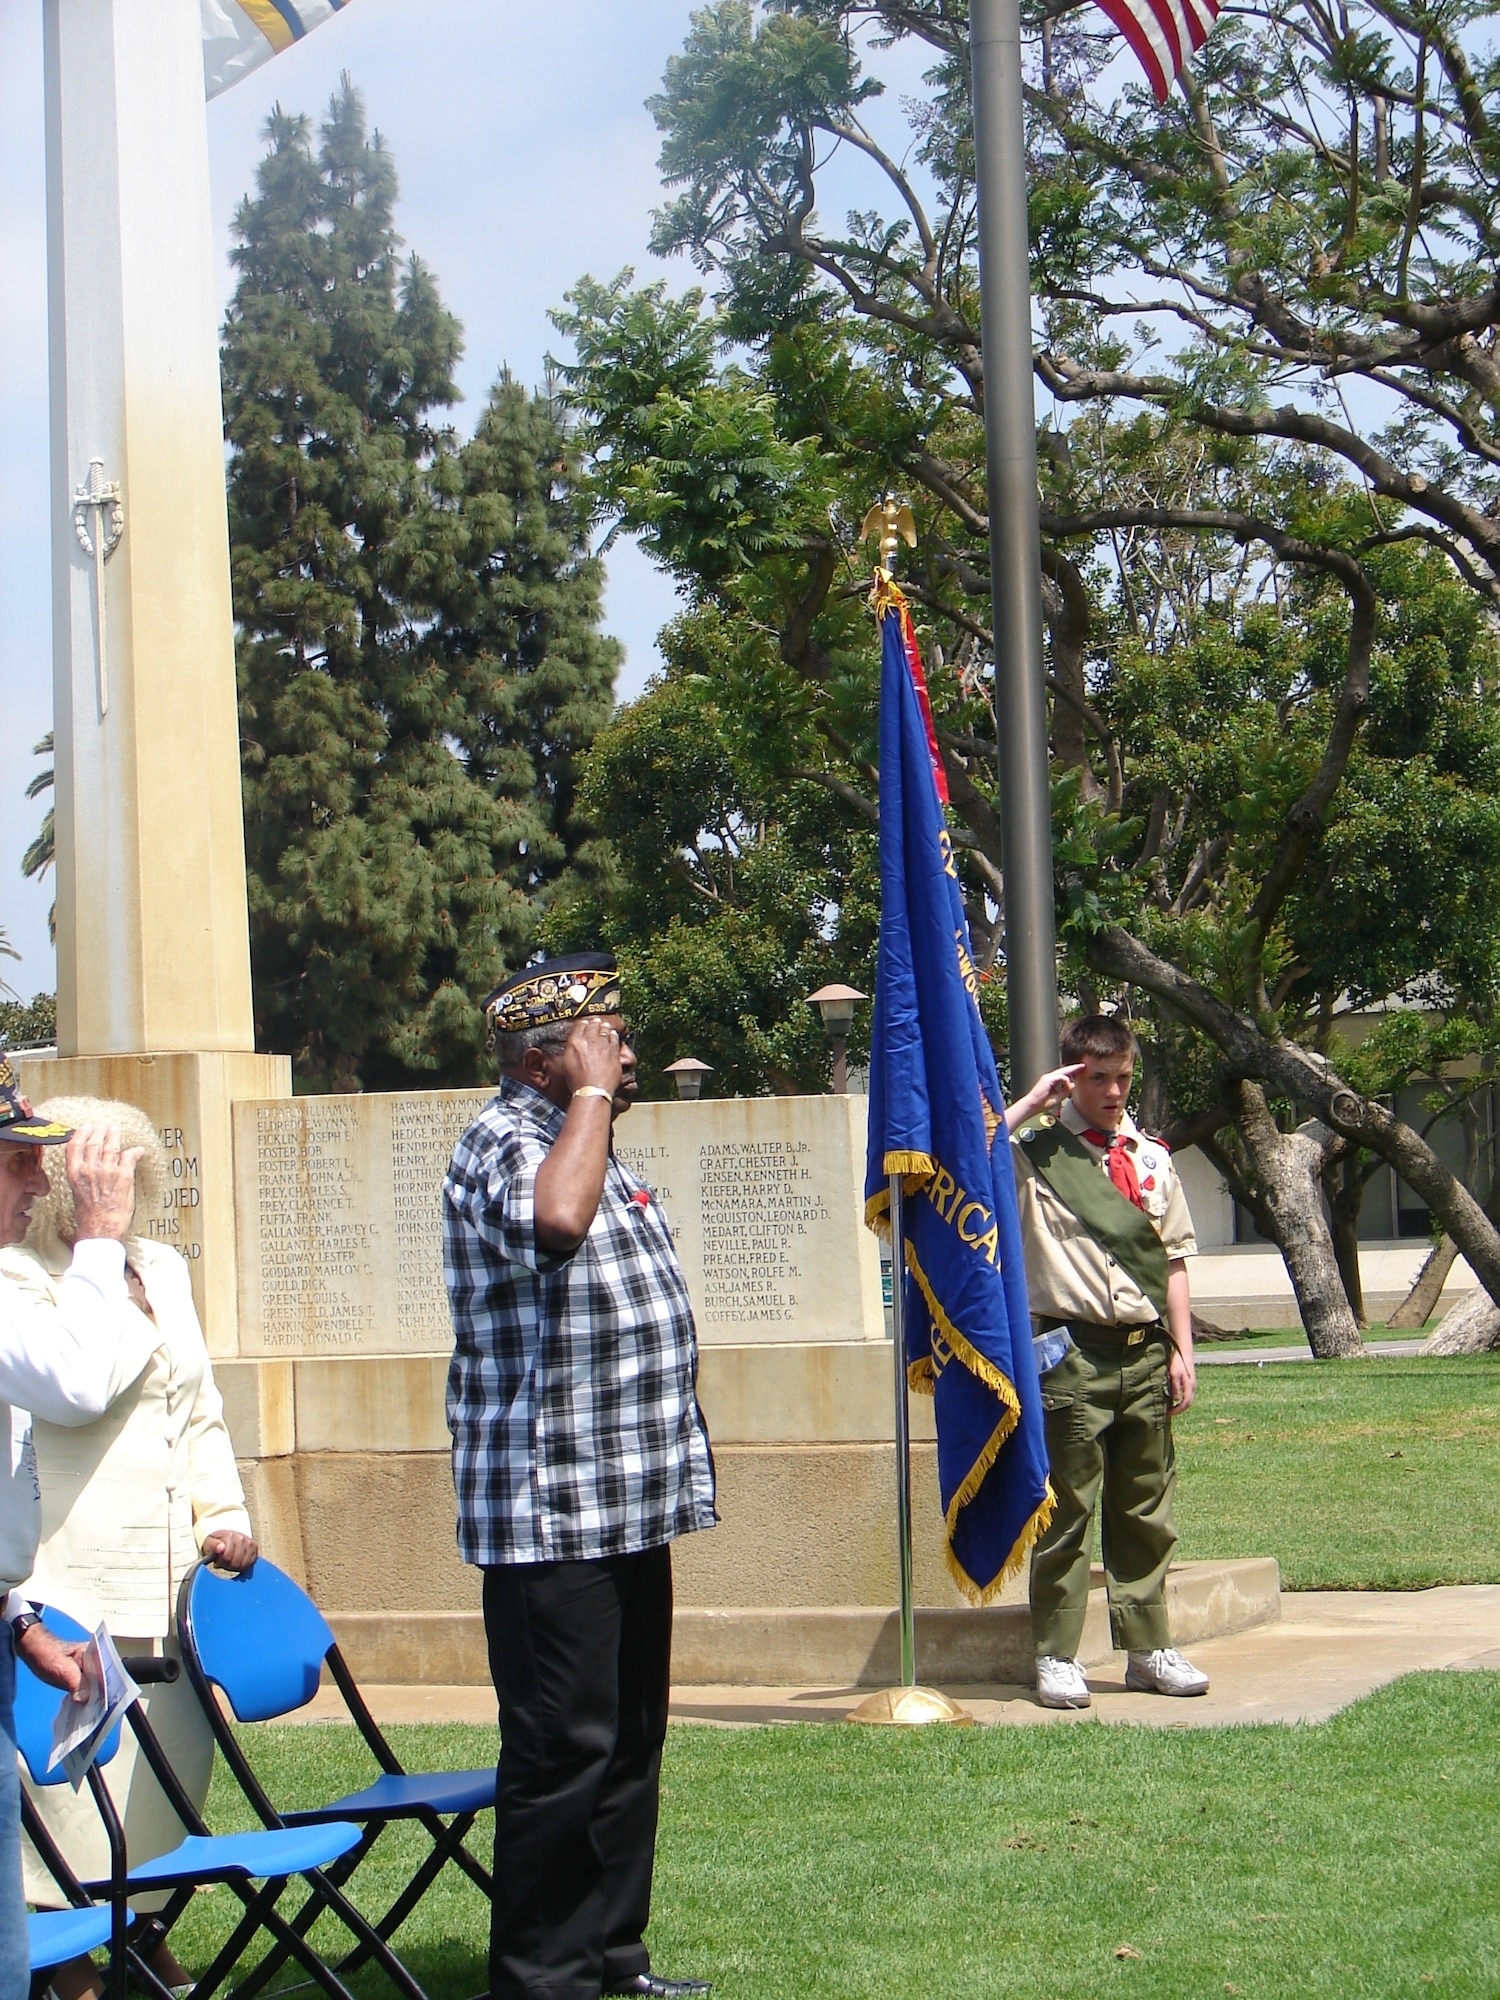 Veterans serving from World War II to Operation Iraqi Freedom attended the 59th Annual Inglewood Memorial Day Service, May 28. The service honored fallen heroes from the city. Col. Douglas Kendall, Spacelift Range Group Commander was the keynote speaker at the event.